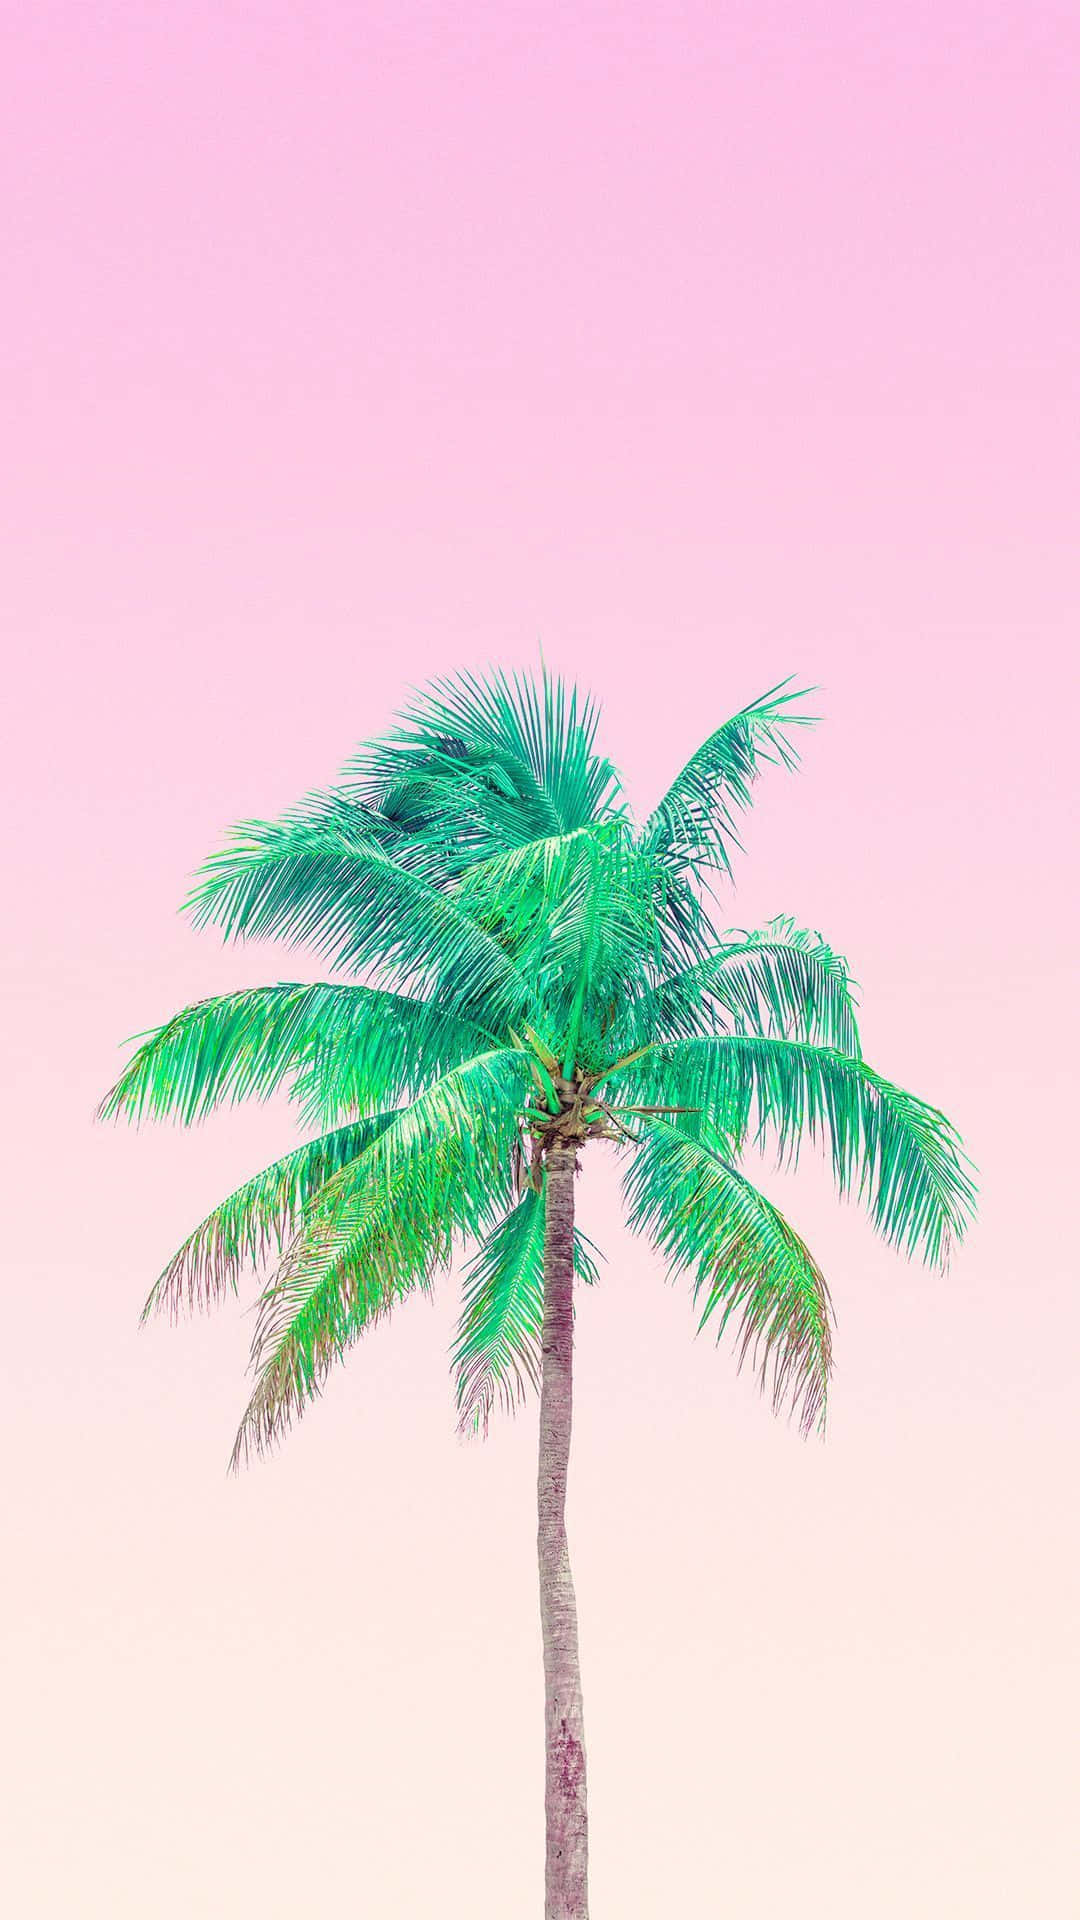 Escape to Paradise in an Aesthetic Tropical Oasis Wallpaper